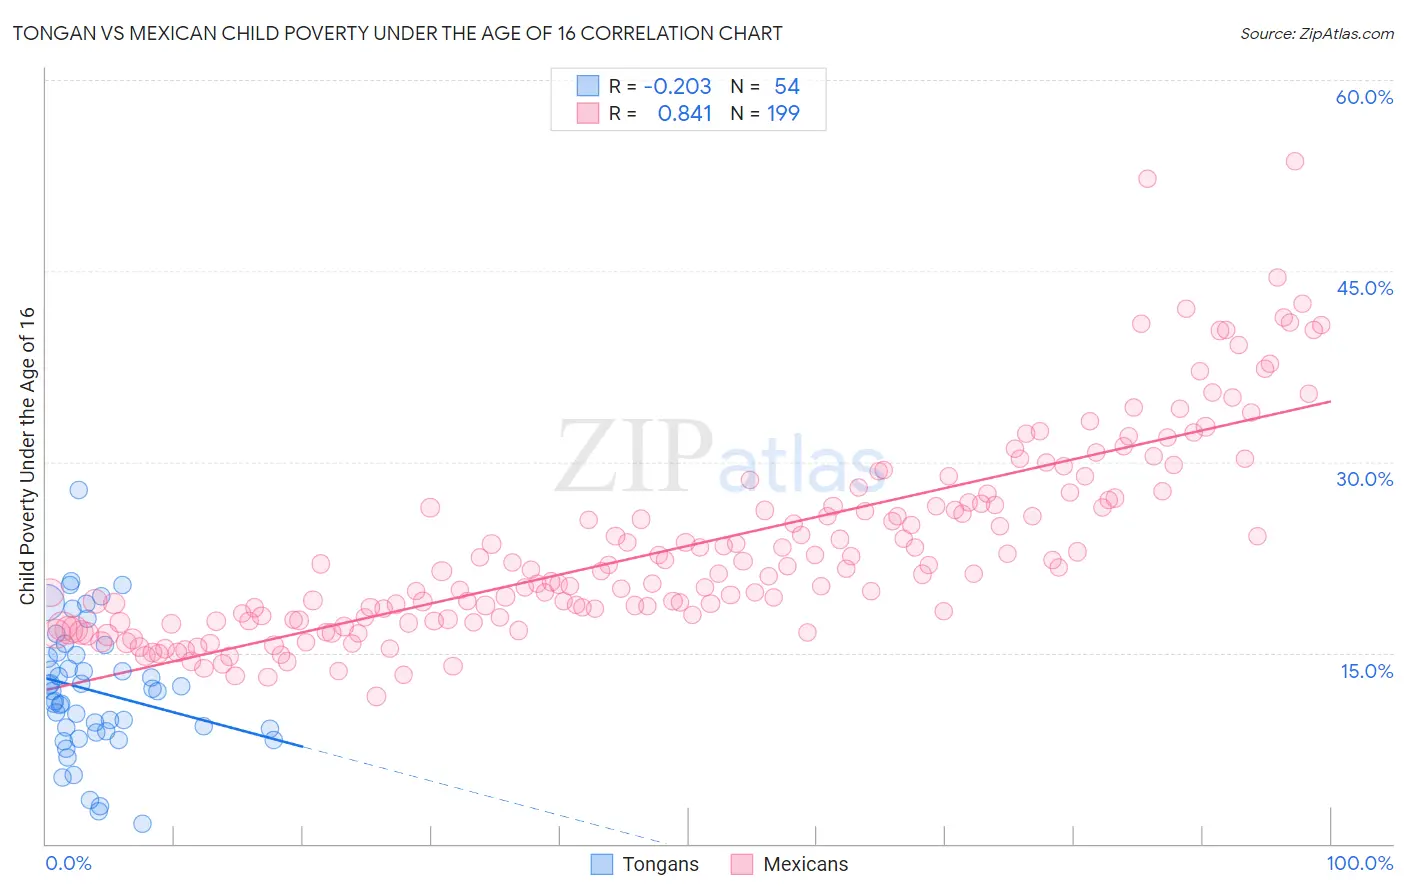 Tongan vs Mexican Child Poverty Under the Age of 16